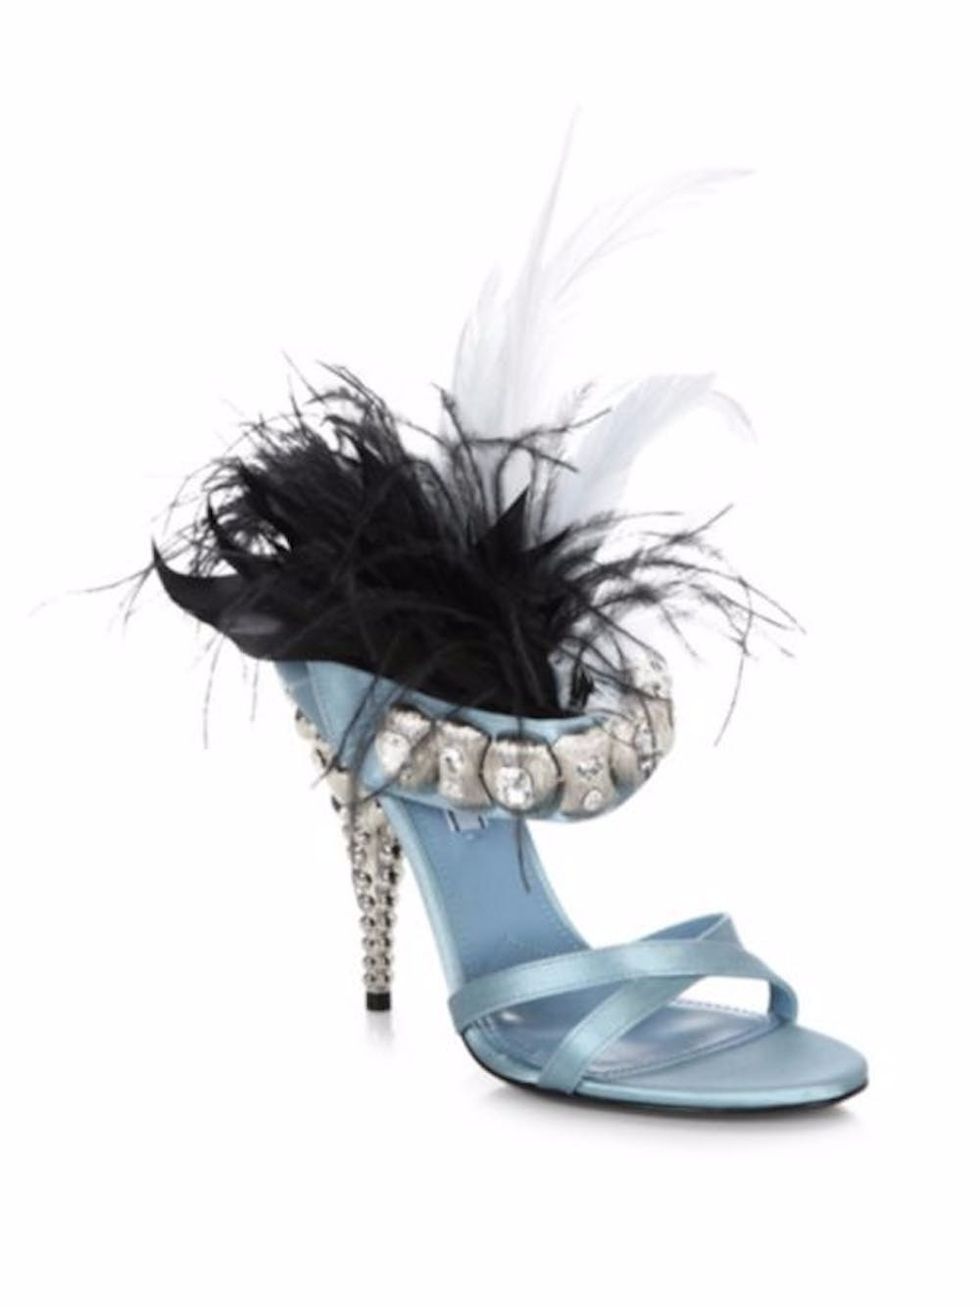 20 Pairs of Jaw-Dropping Shoes from Saks Fifth Avenue’s Exclusive ...